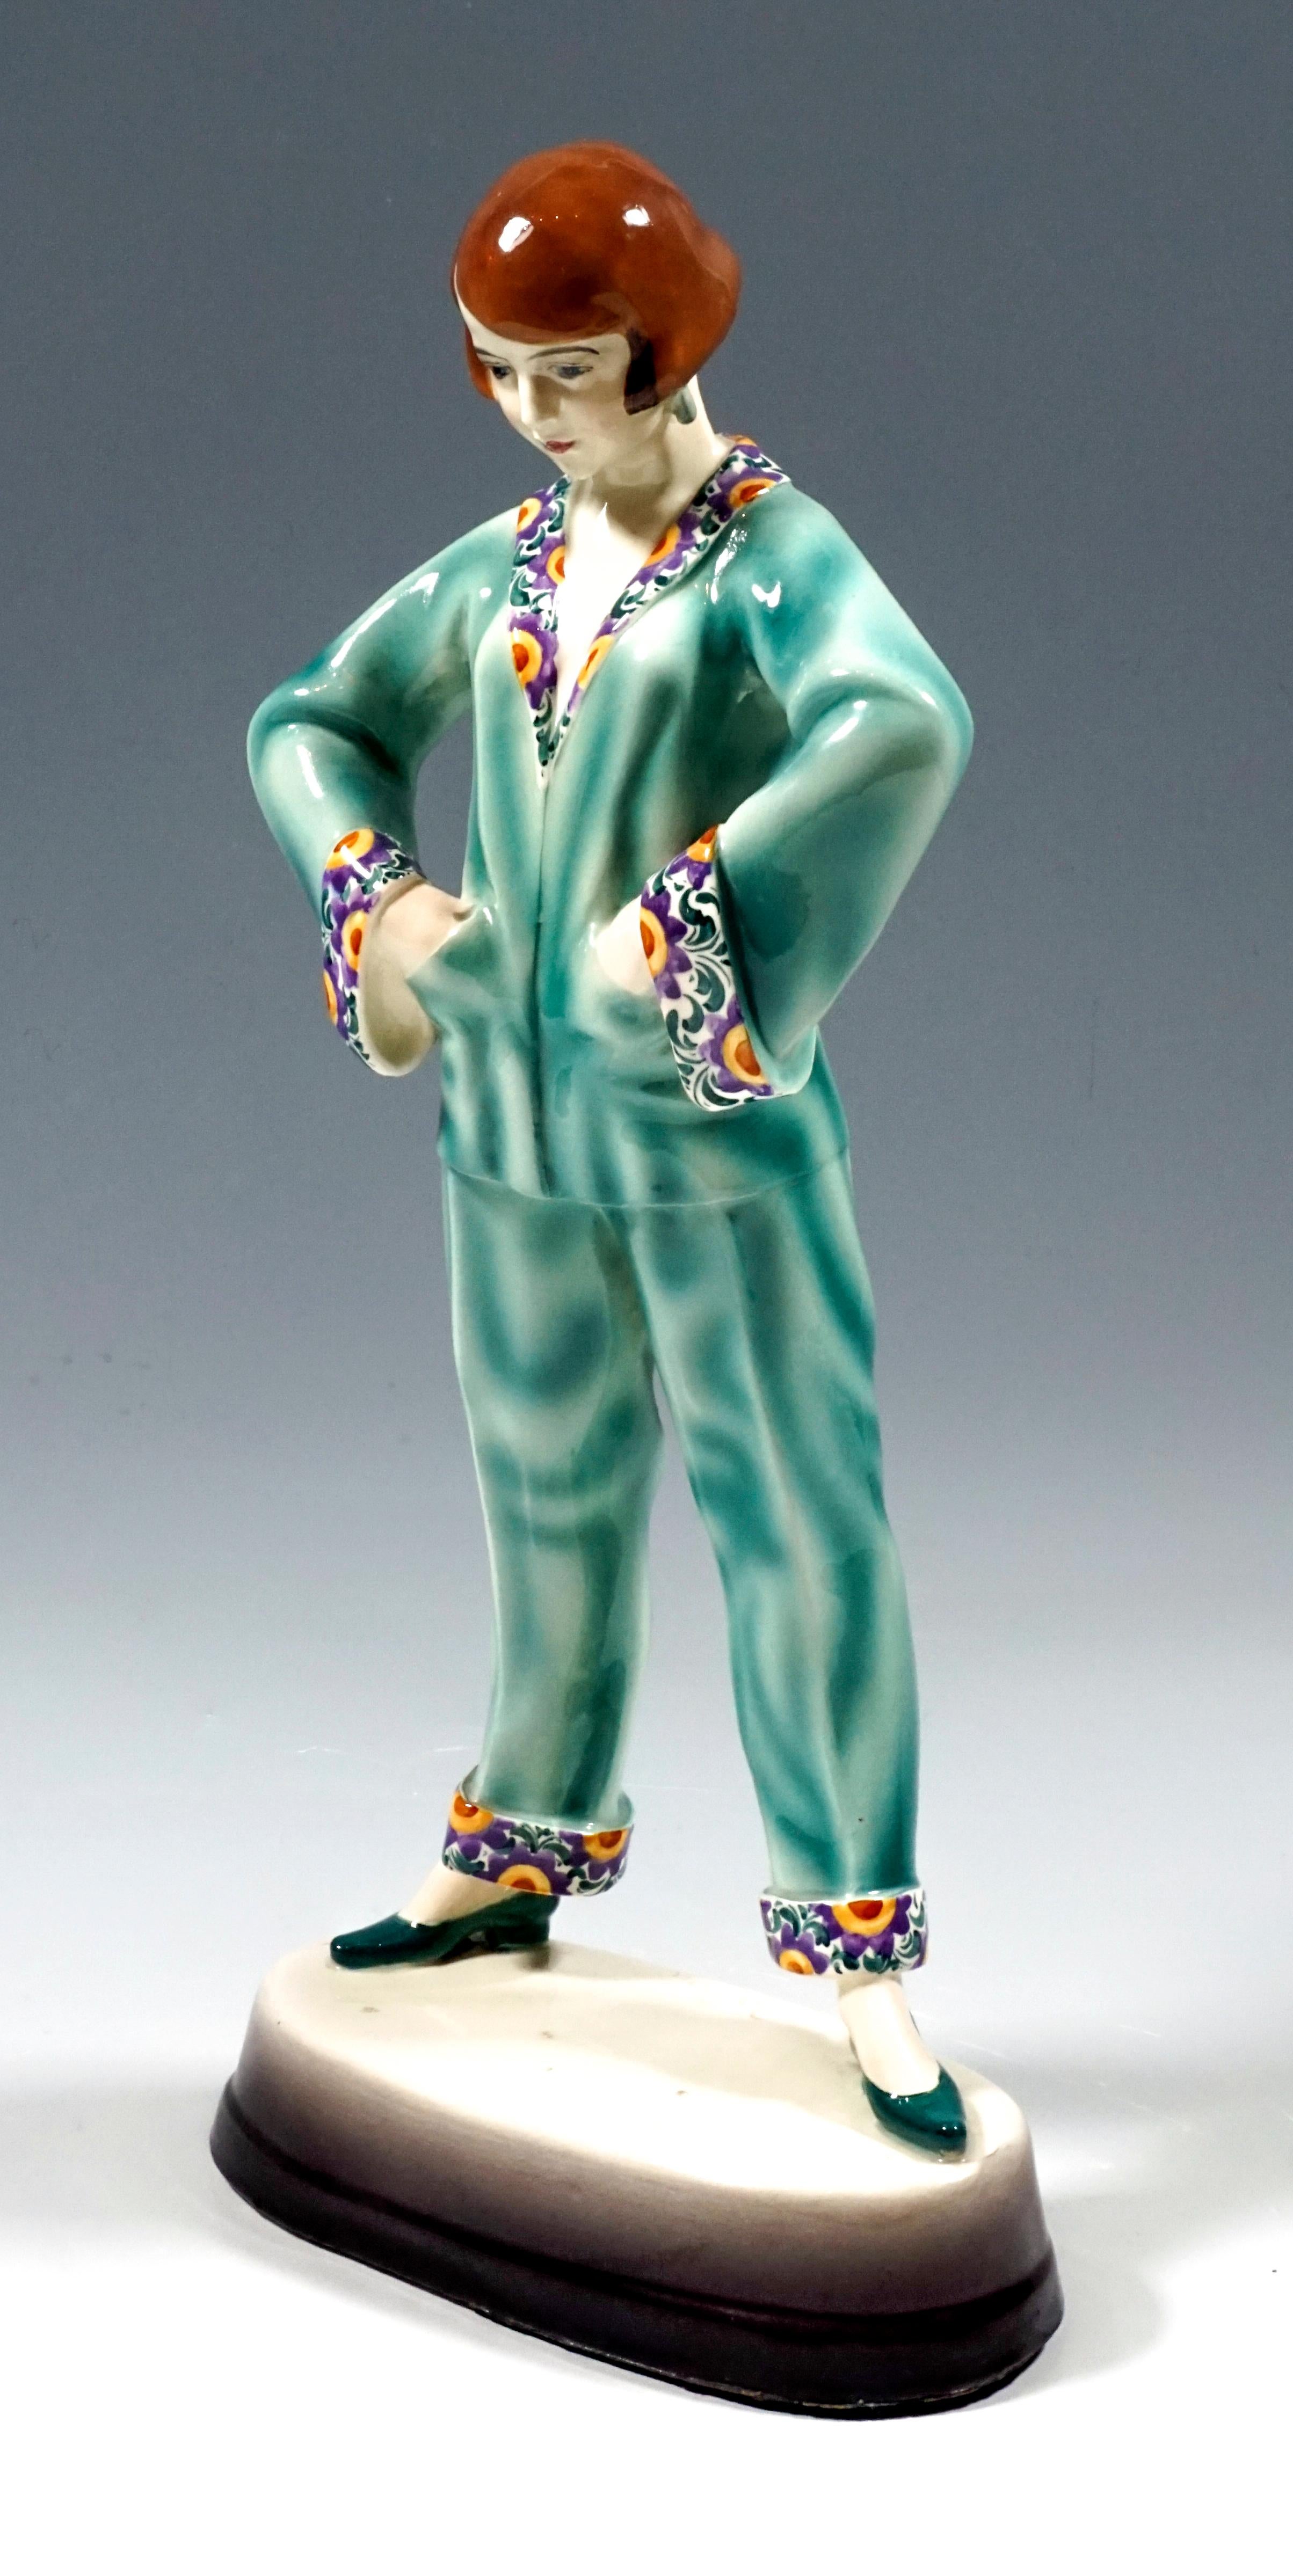 Very rare Art Deco goldscheider ceramics figurine
The young lady with a brunette page-boy head, shown is the German actress Emmy Sturm (1900-1977), is wearing turquoise silk pajamas with turned-up hems in a multicolored floral pattern, standing